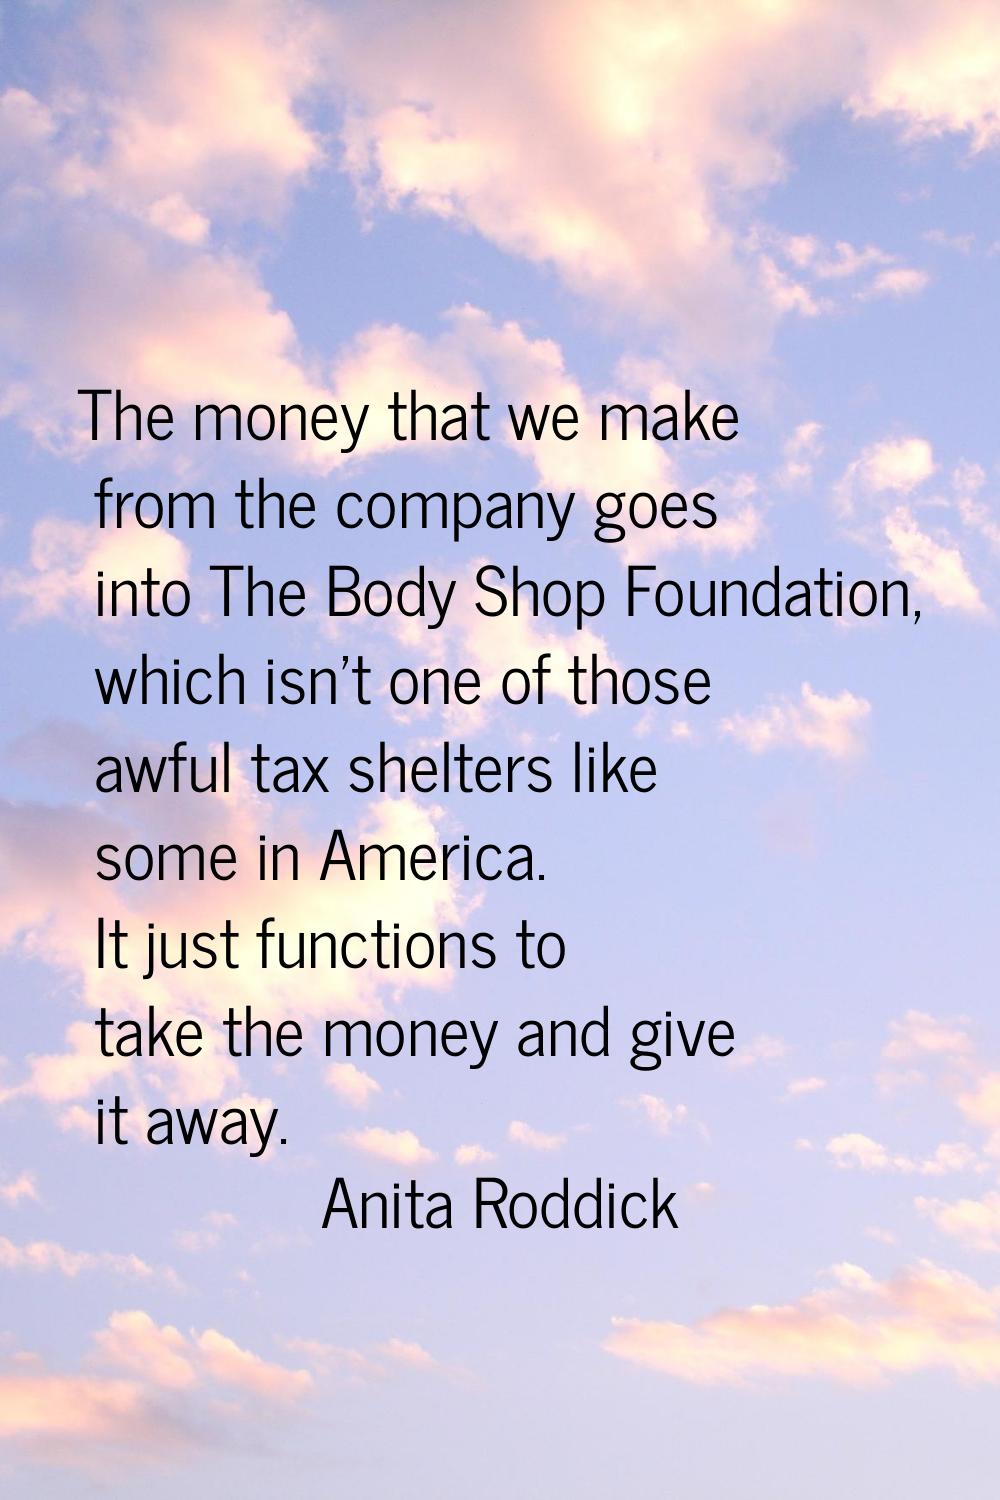 The money that we make from the company goes into The Body Shop Foundation, which isn't one of thos